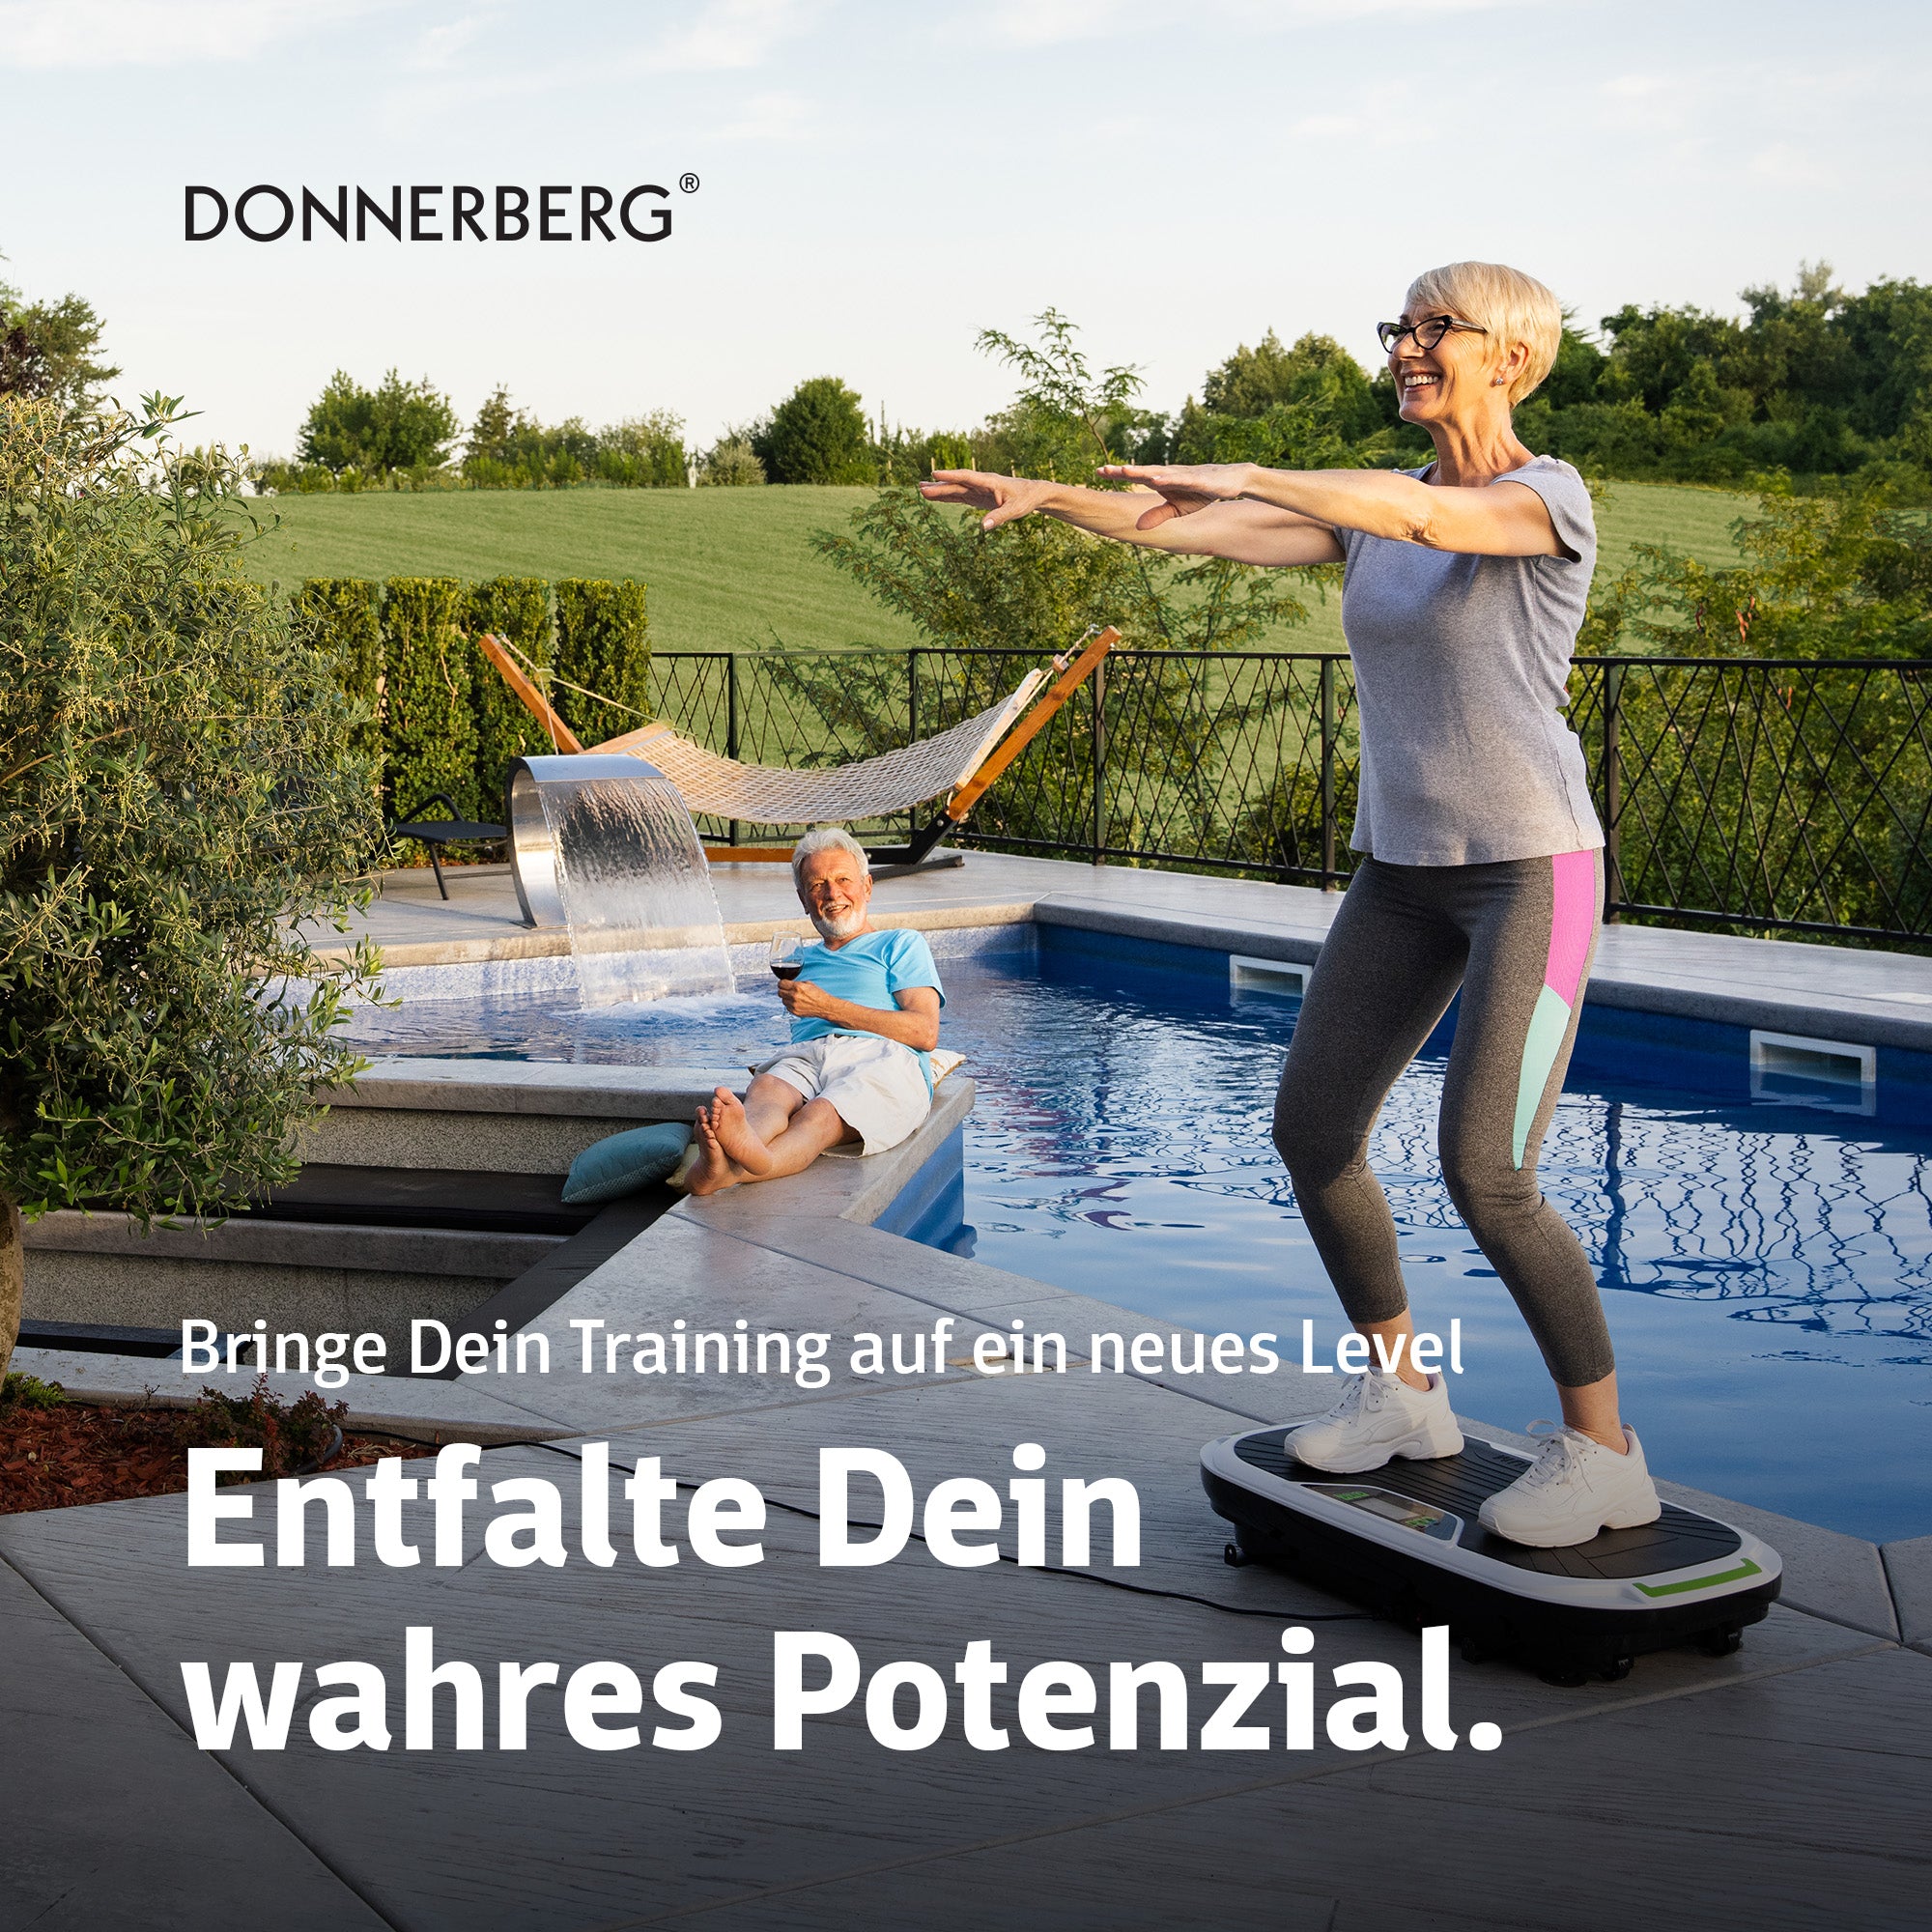 Woman exercising on vibration plate in her garden next to swimming pool